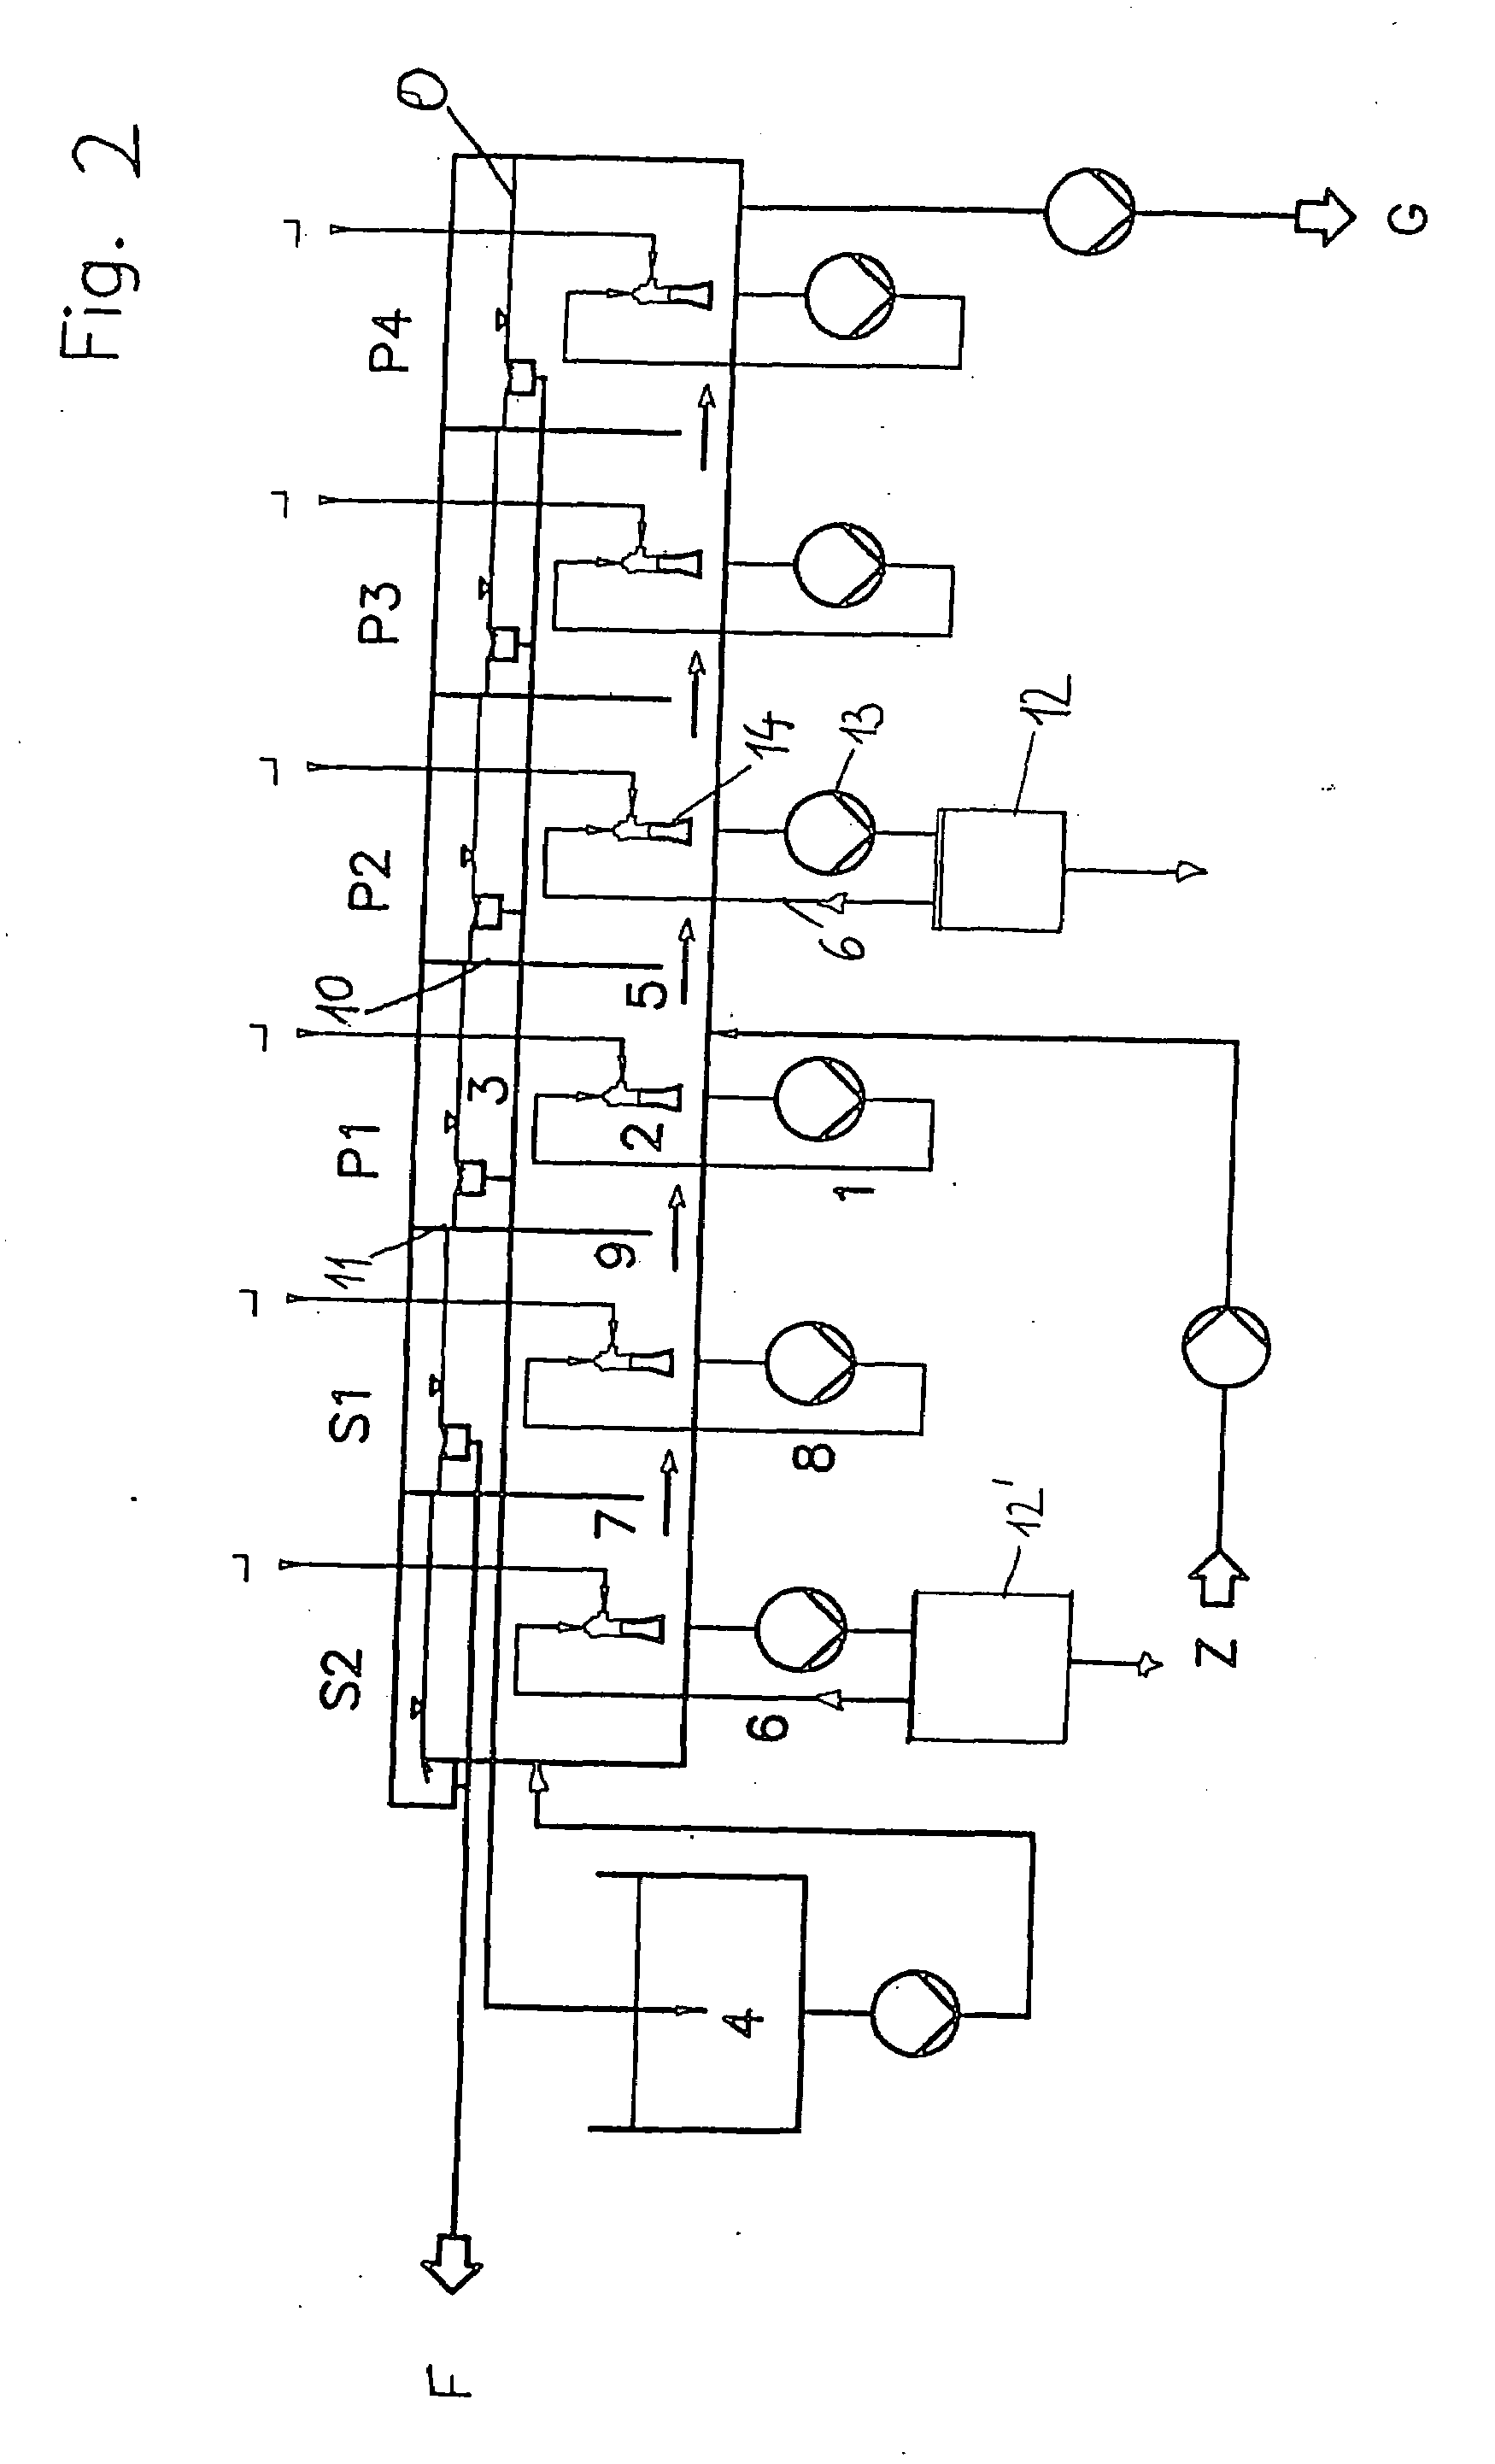 Process and device for aerating suspensions